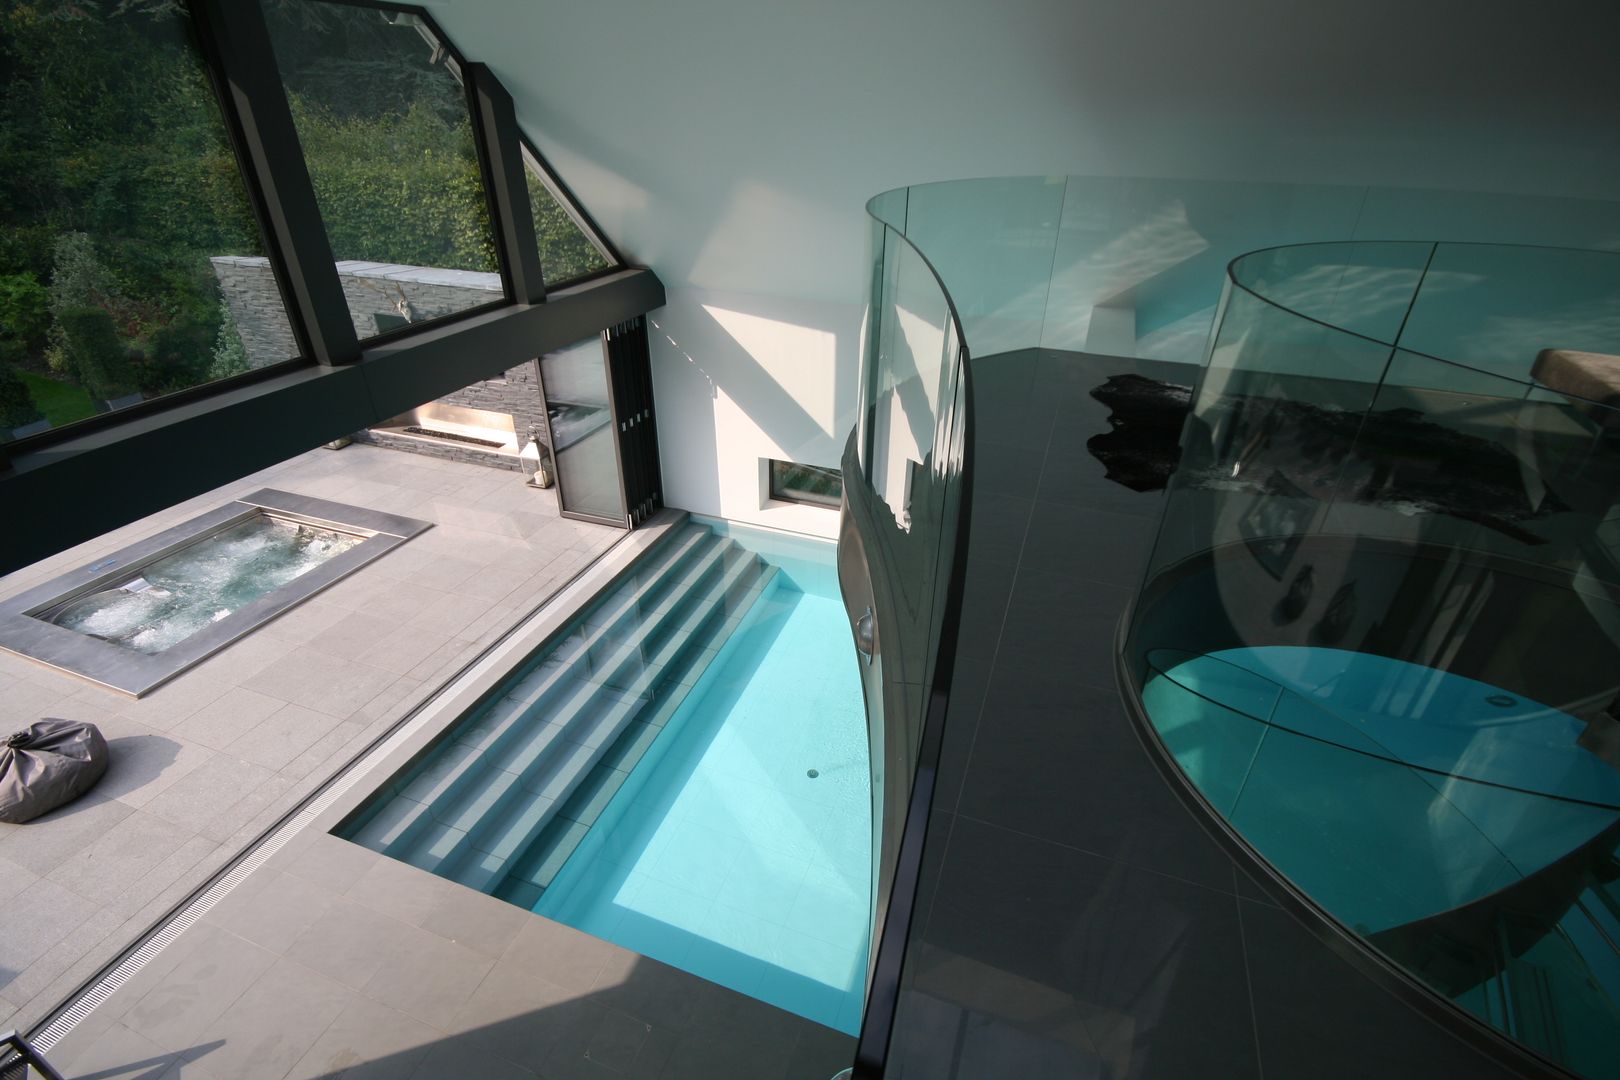 Indoor pool with waterfall features, sauna and stainless steel spa, Tanby Pools Tanby Pools 모던스타일 수영장